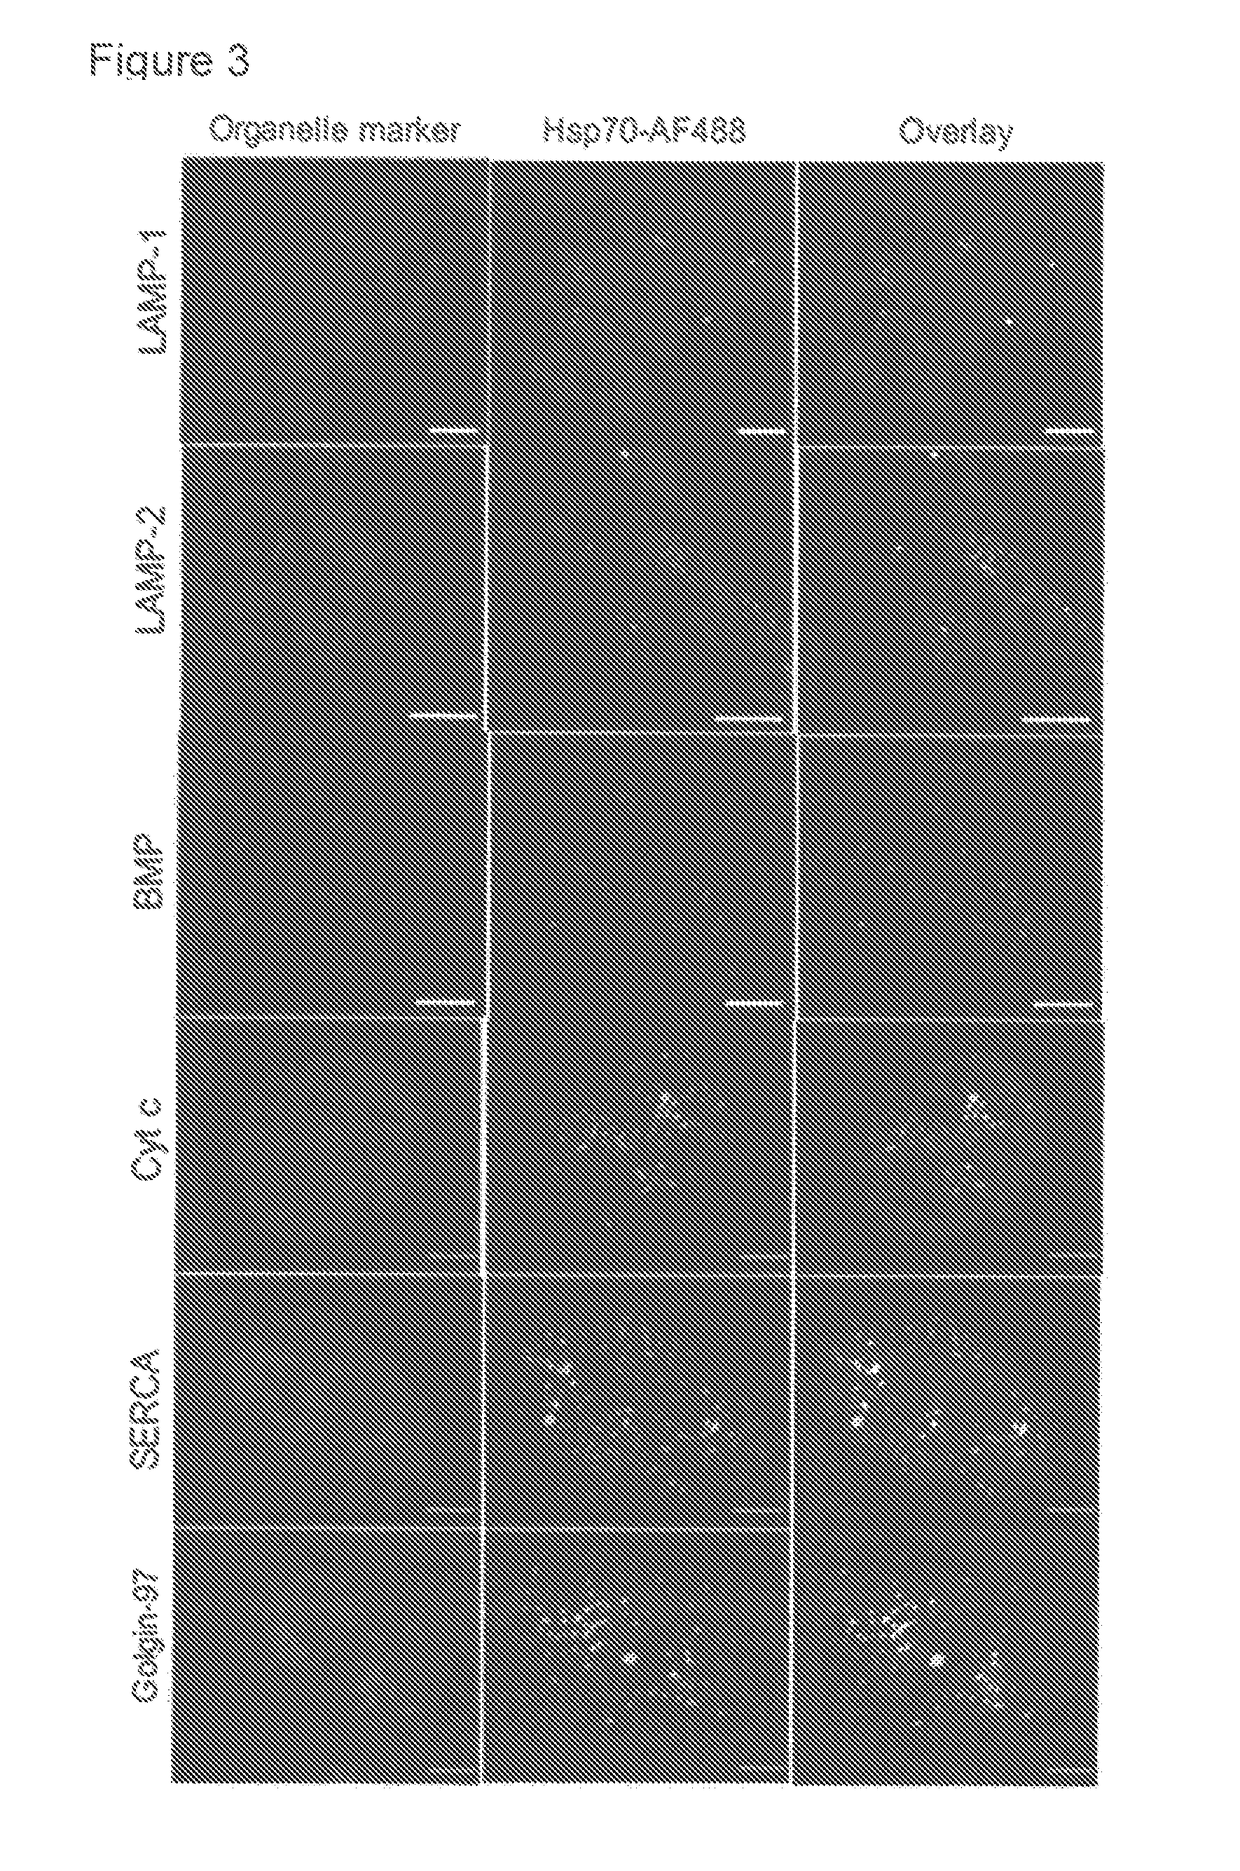 Methods for increasing intracellular activity of Hsp70